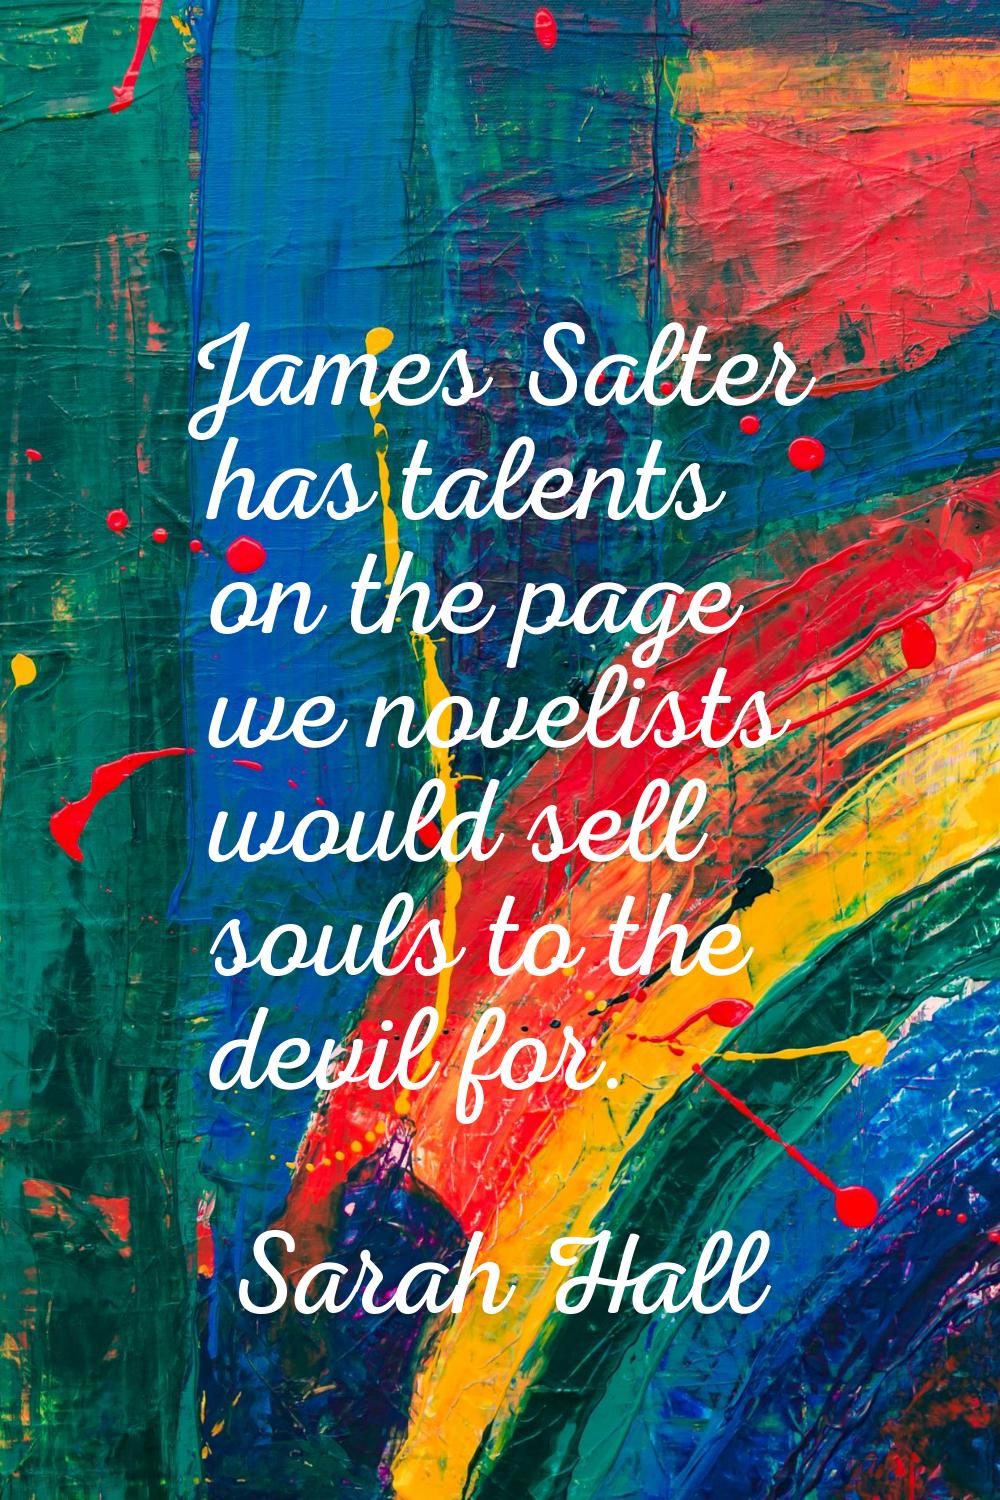 James Salter has talents on the page we novelists would sell souls to the devil for.